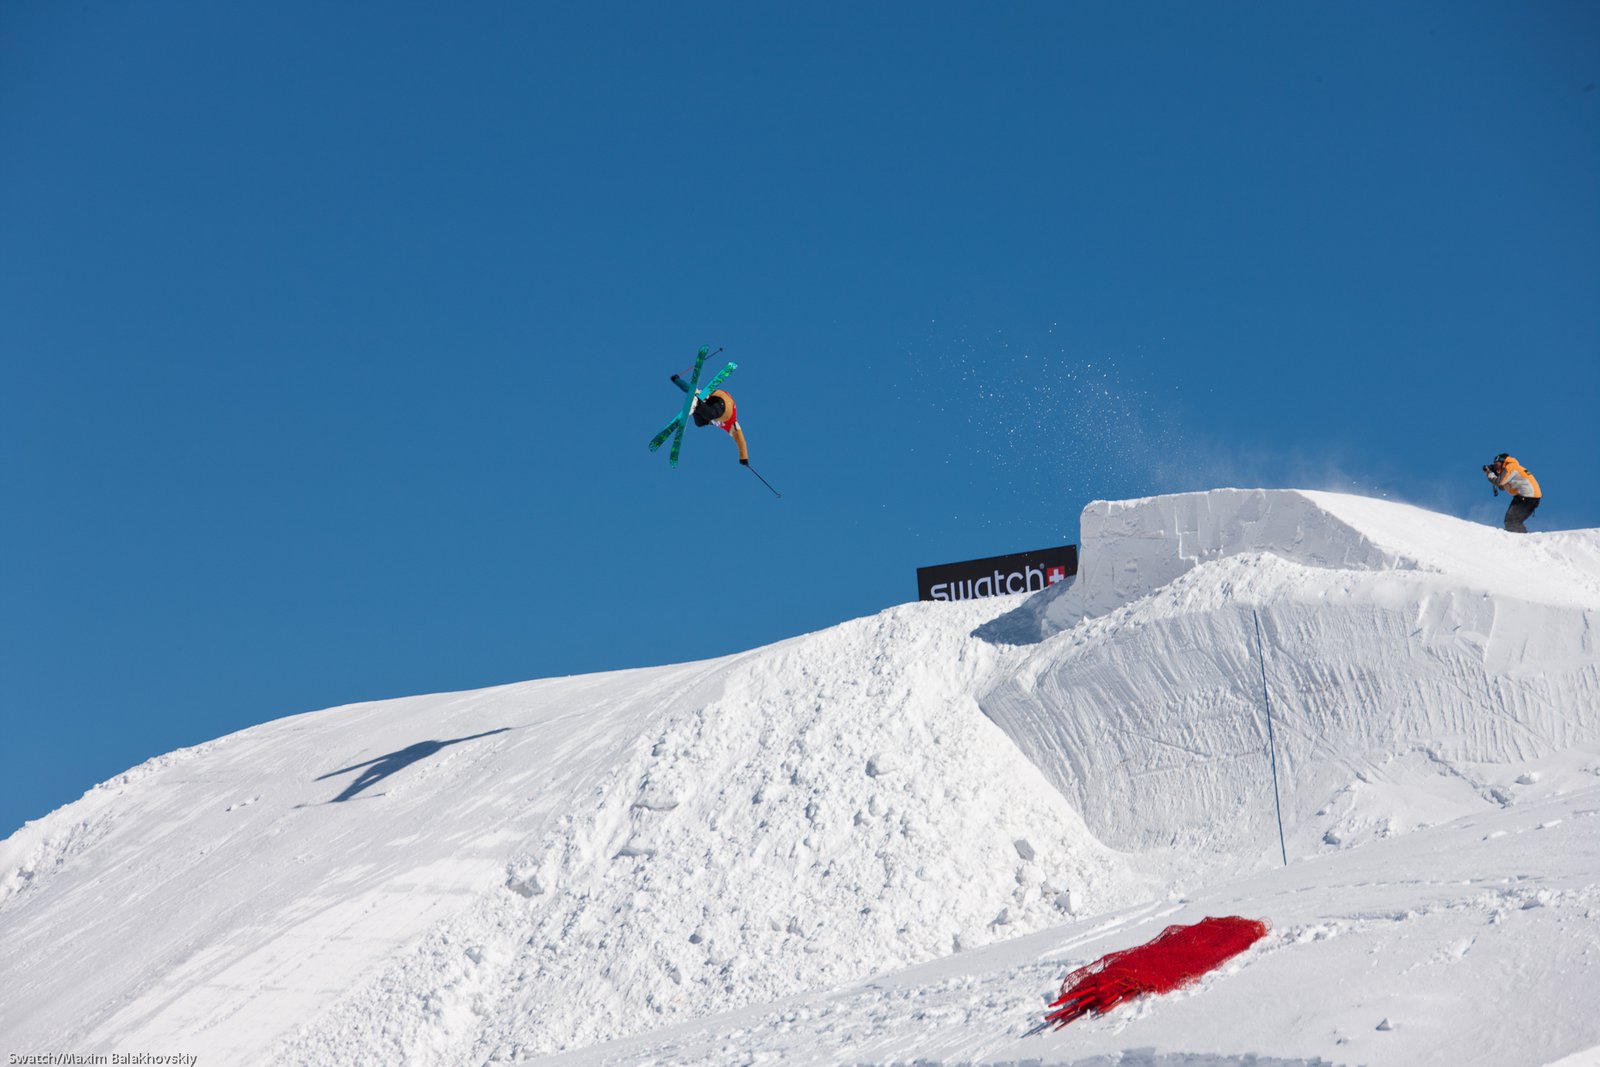 Matt Margetts at the Swatch Skiers Cup